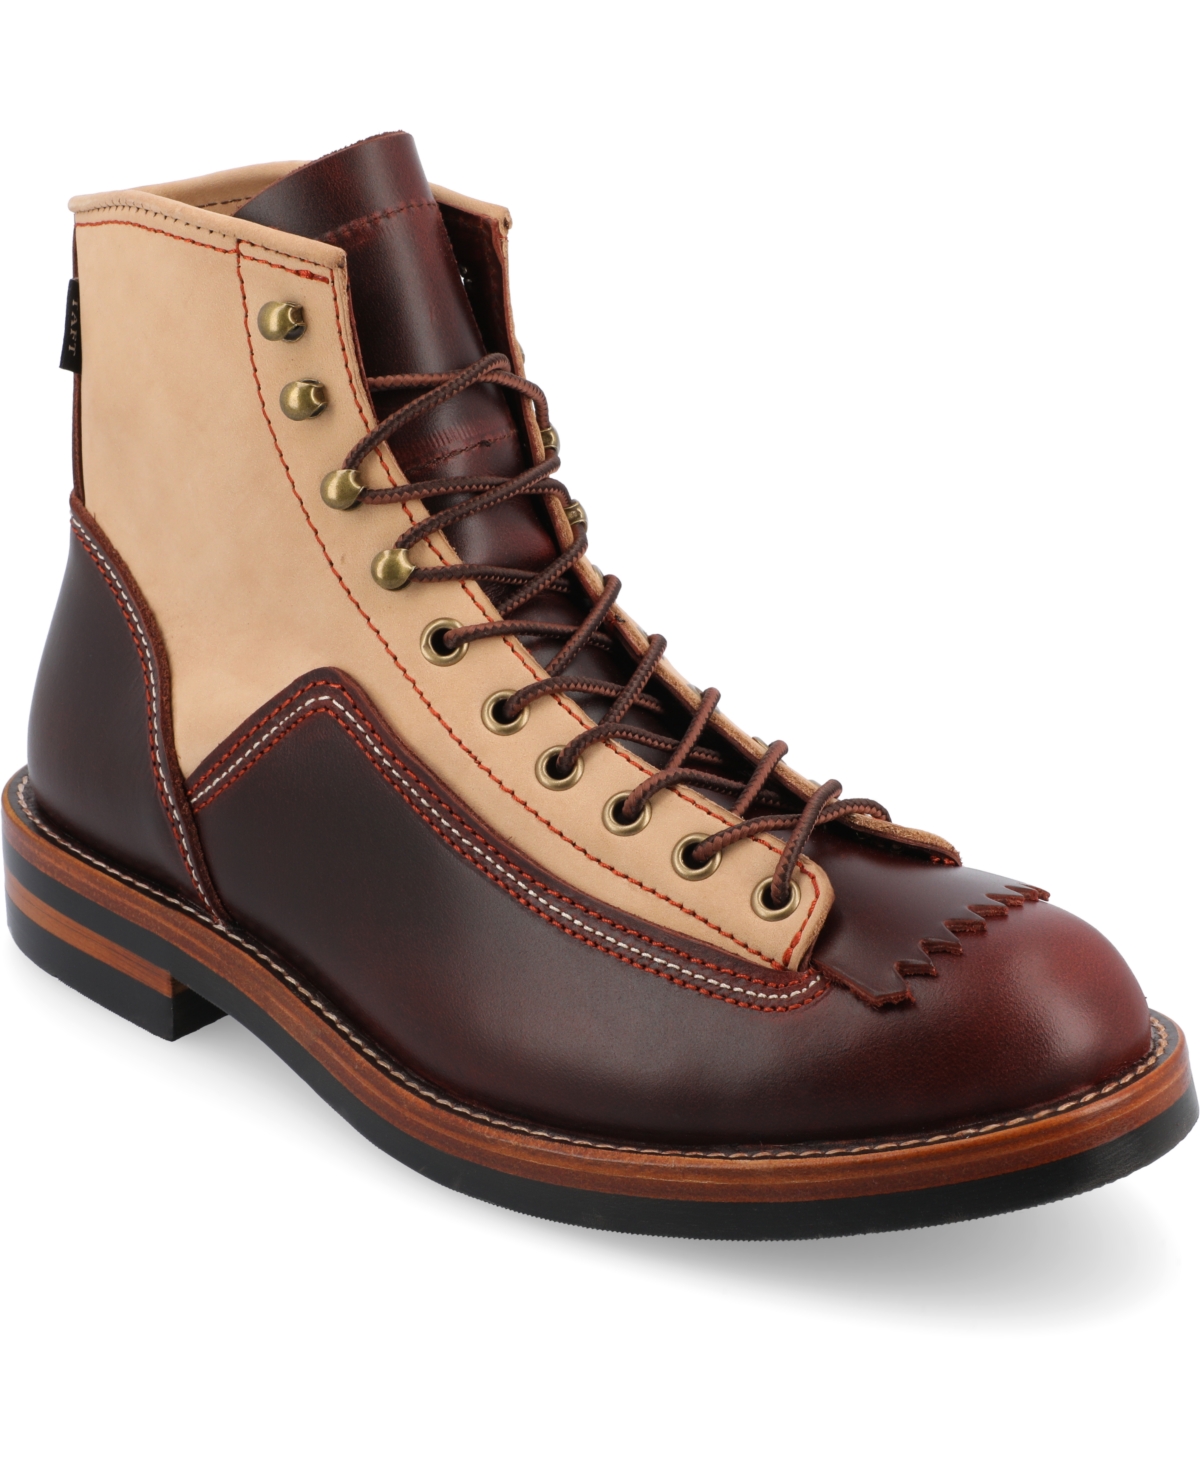 Shop Taft 365 Men's Model 007 Rugged Lace-up Boots In Cherry,cream